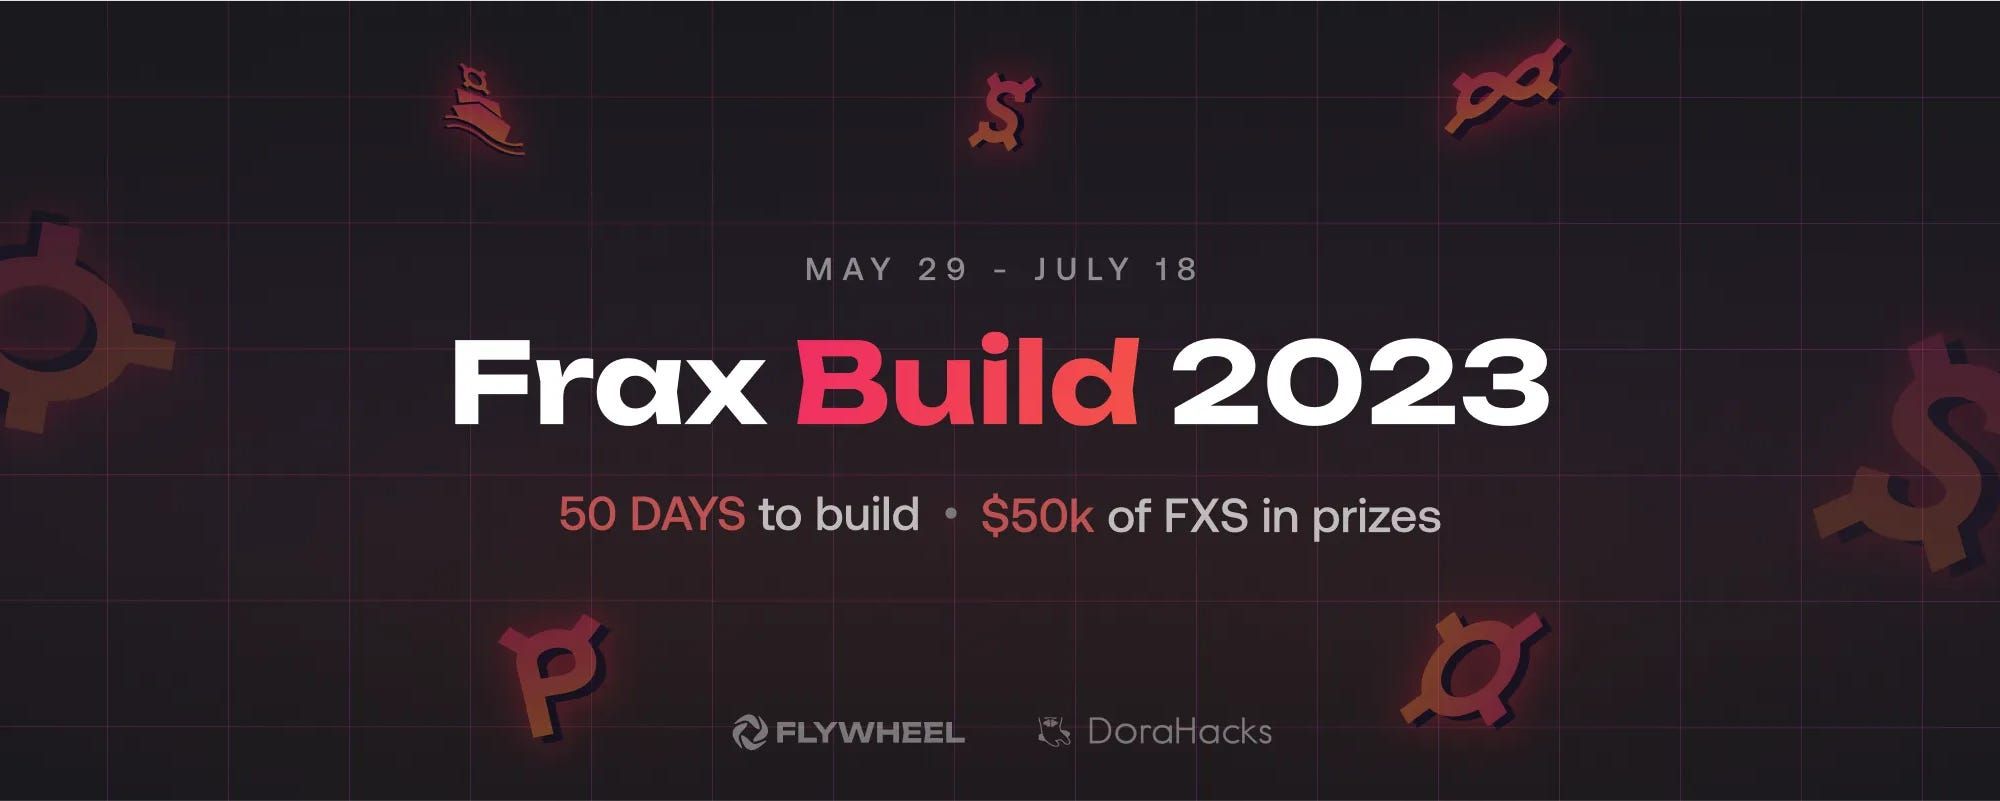 FraxBuild Hackathon Launches! Here is What You Need To Know thumbnail